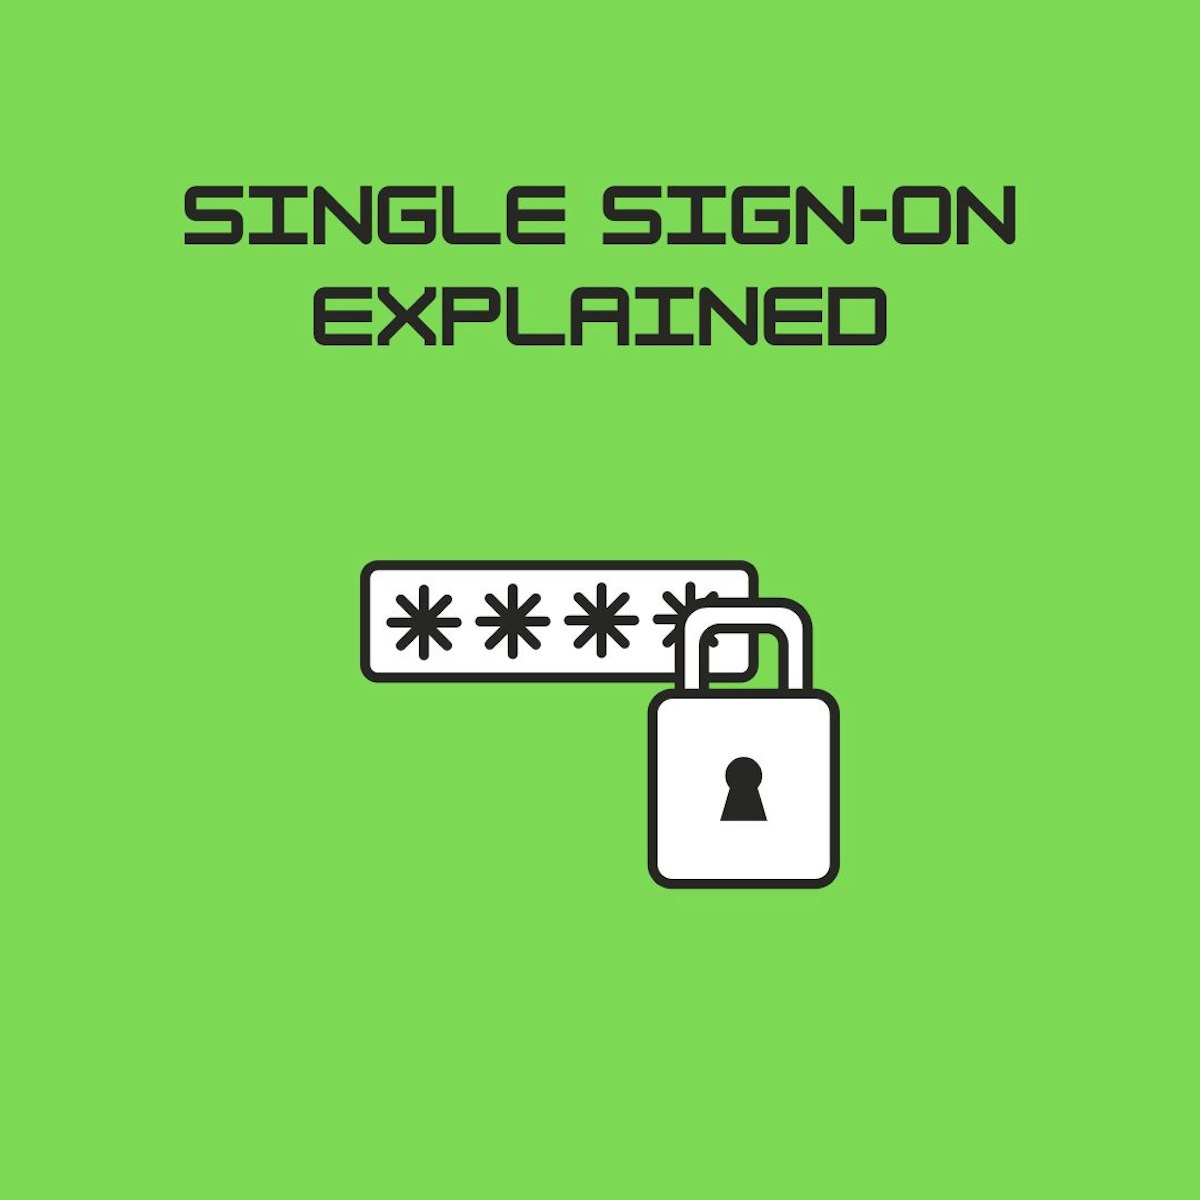 featured image - What is Single Sign-On about?